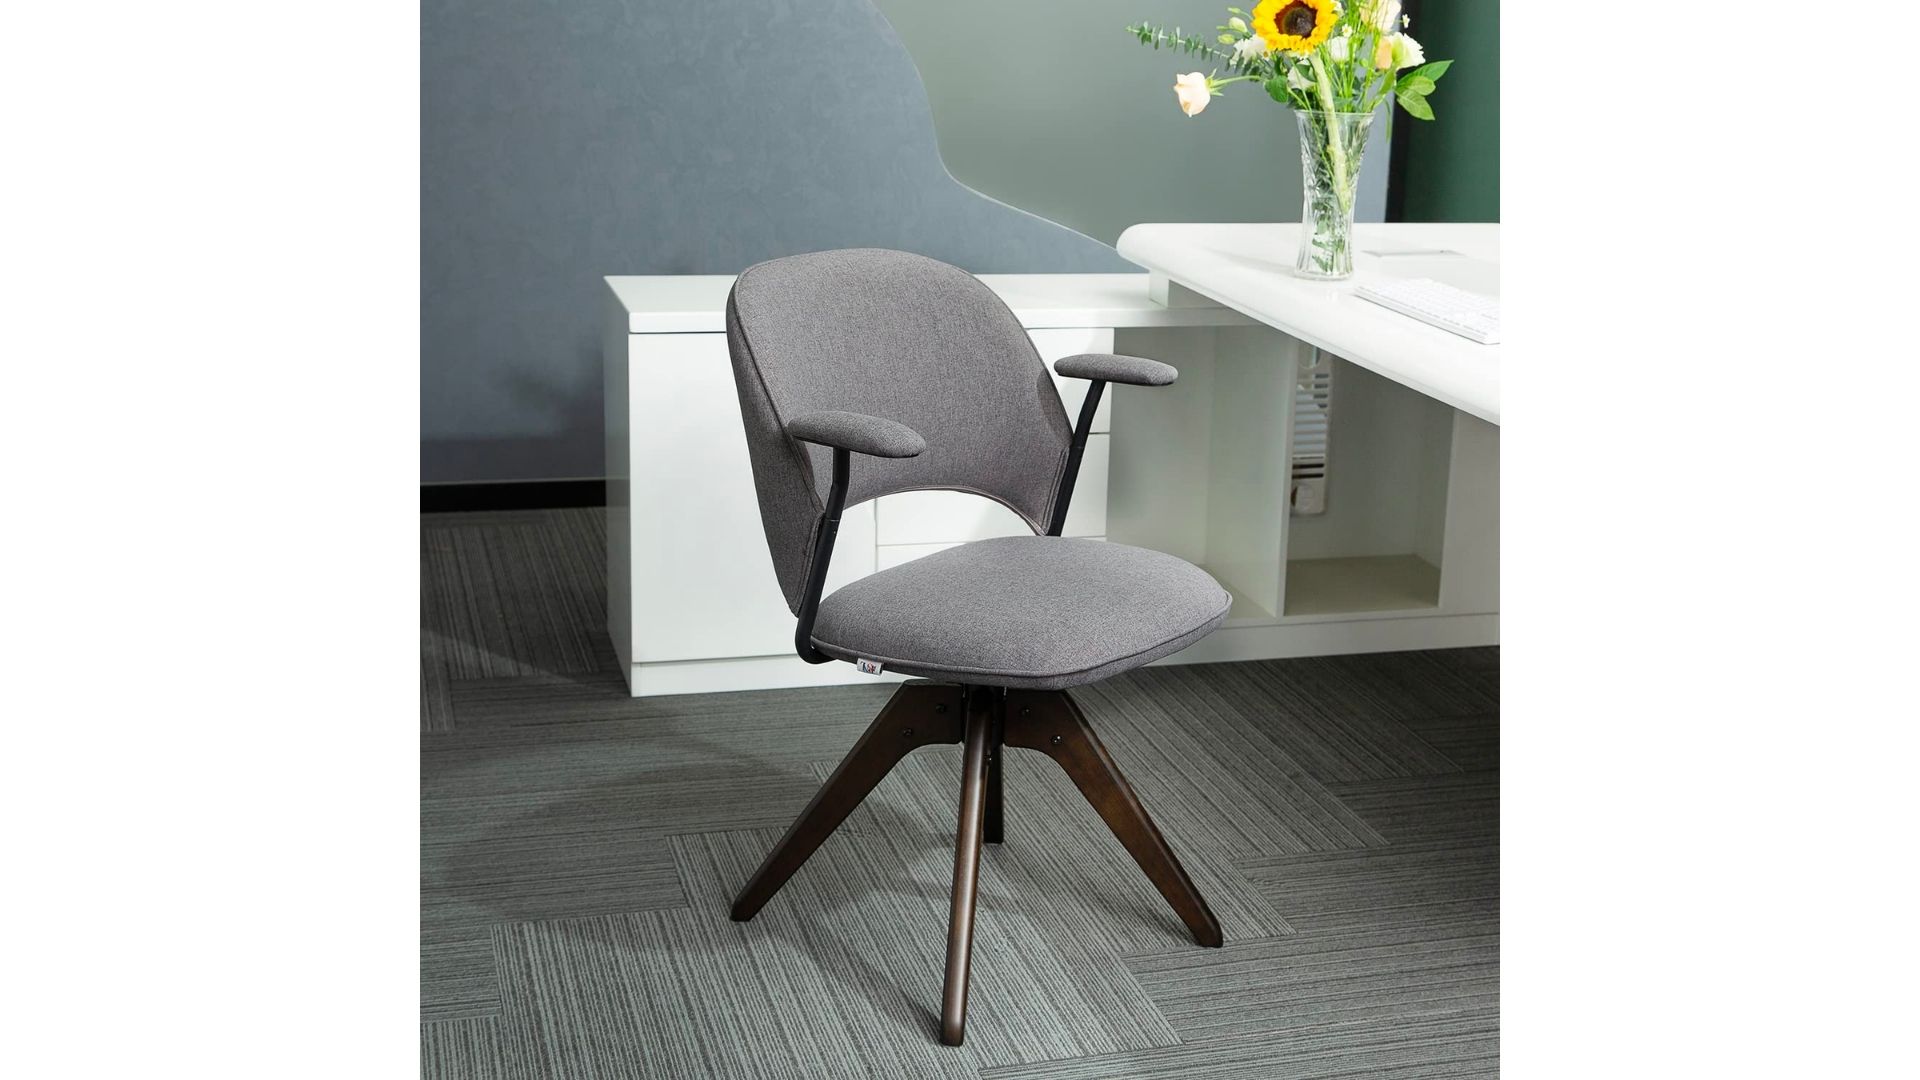 15 Best Desk Chairs With No Wheels - Woman's World